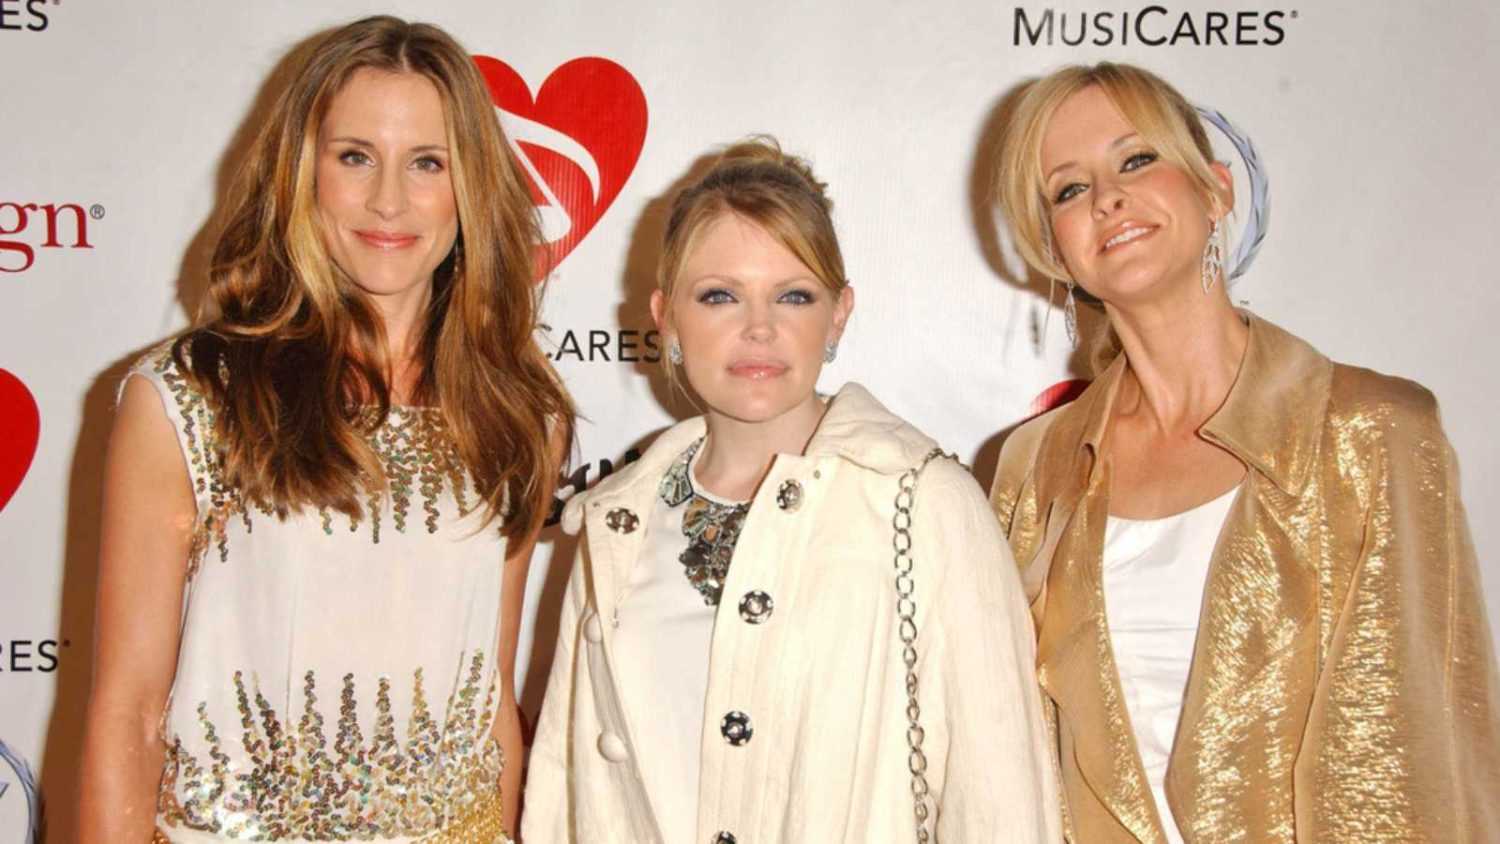 Dixie Chicks at the 2007 MusiCares Person of the Year Honoring Don Henley. Los Angeles Convention Center, Los Angeles, CA. 02-09-07